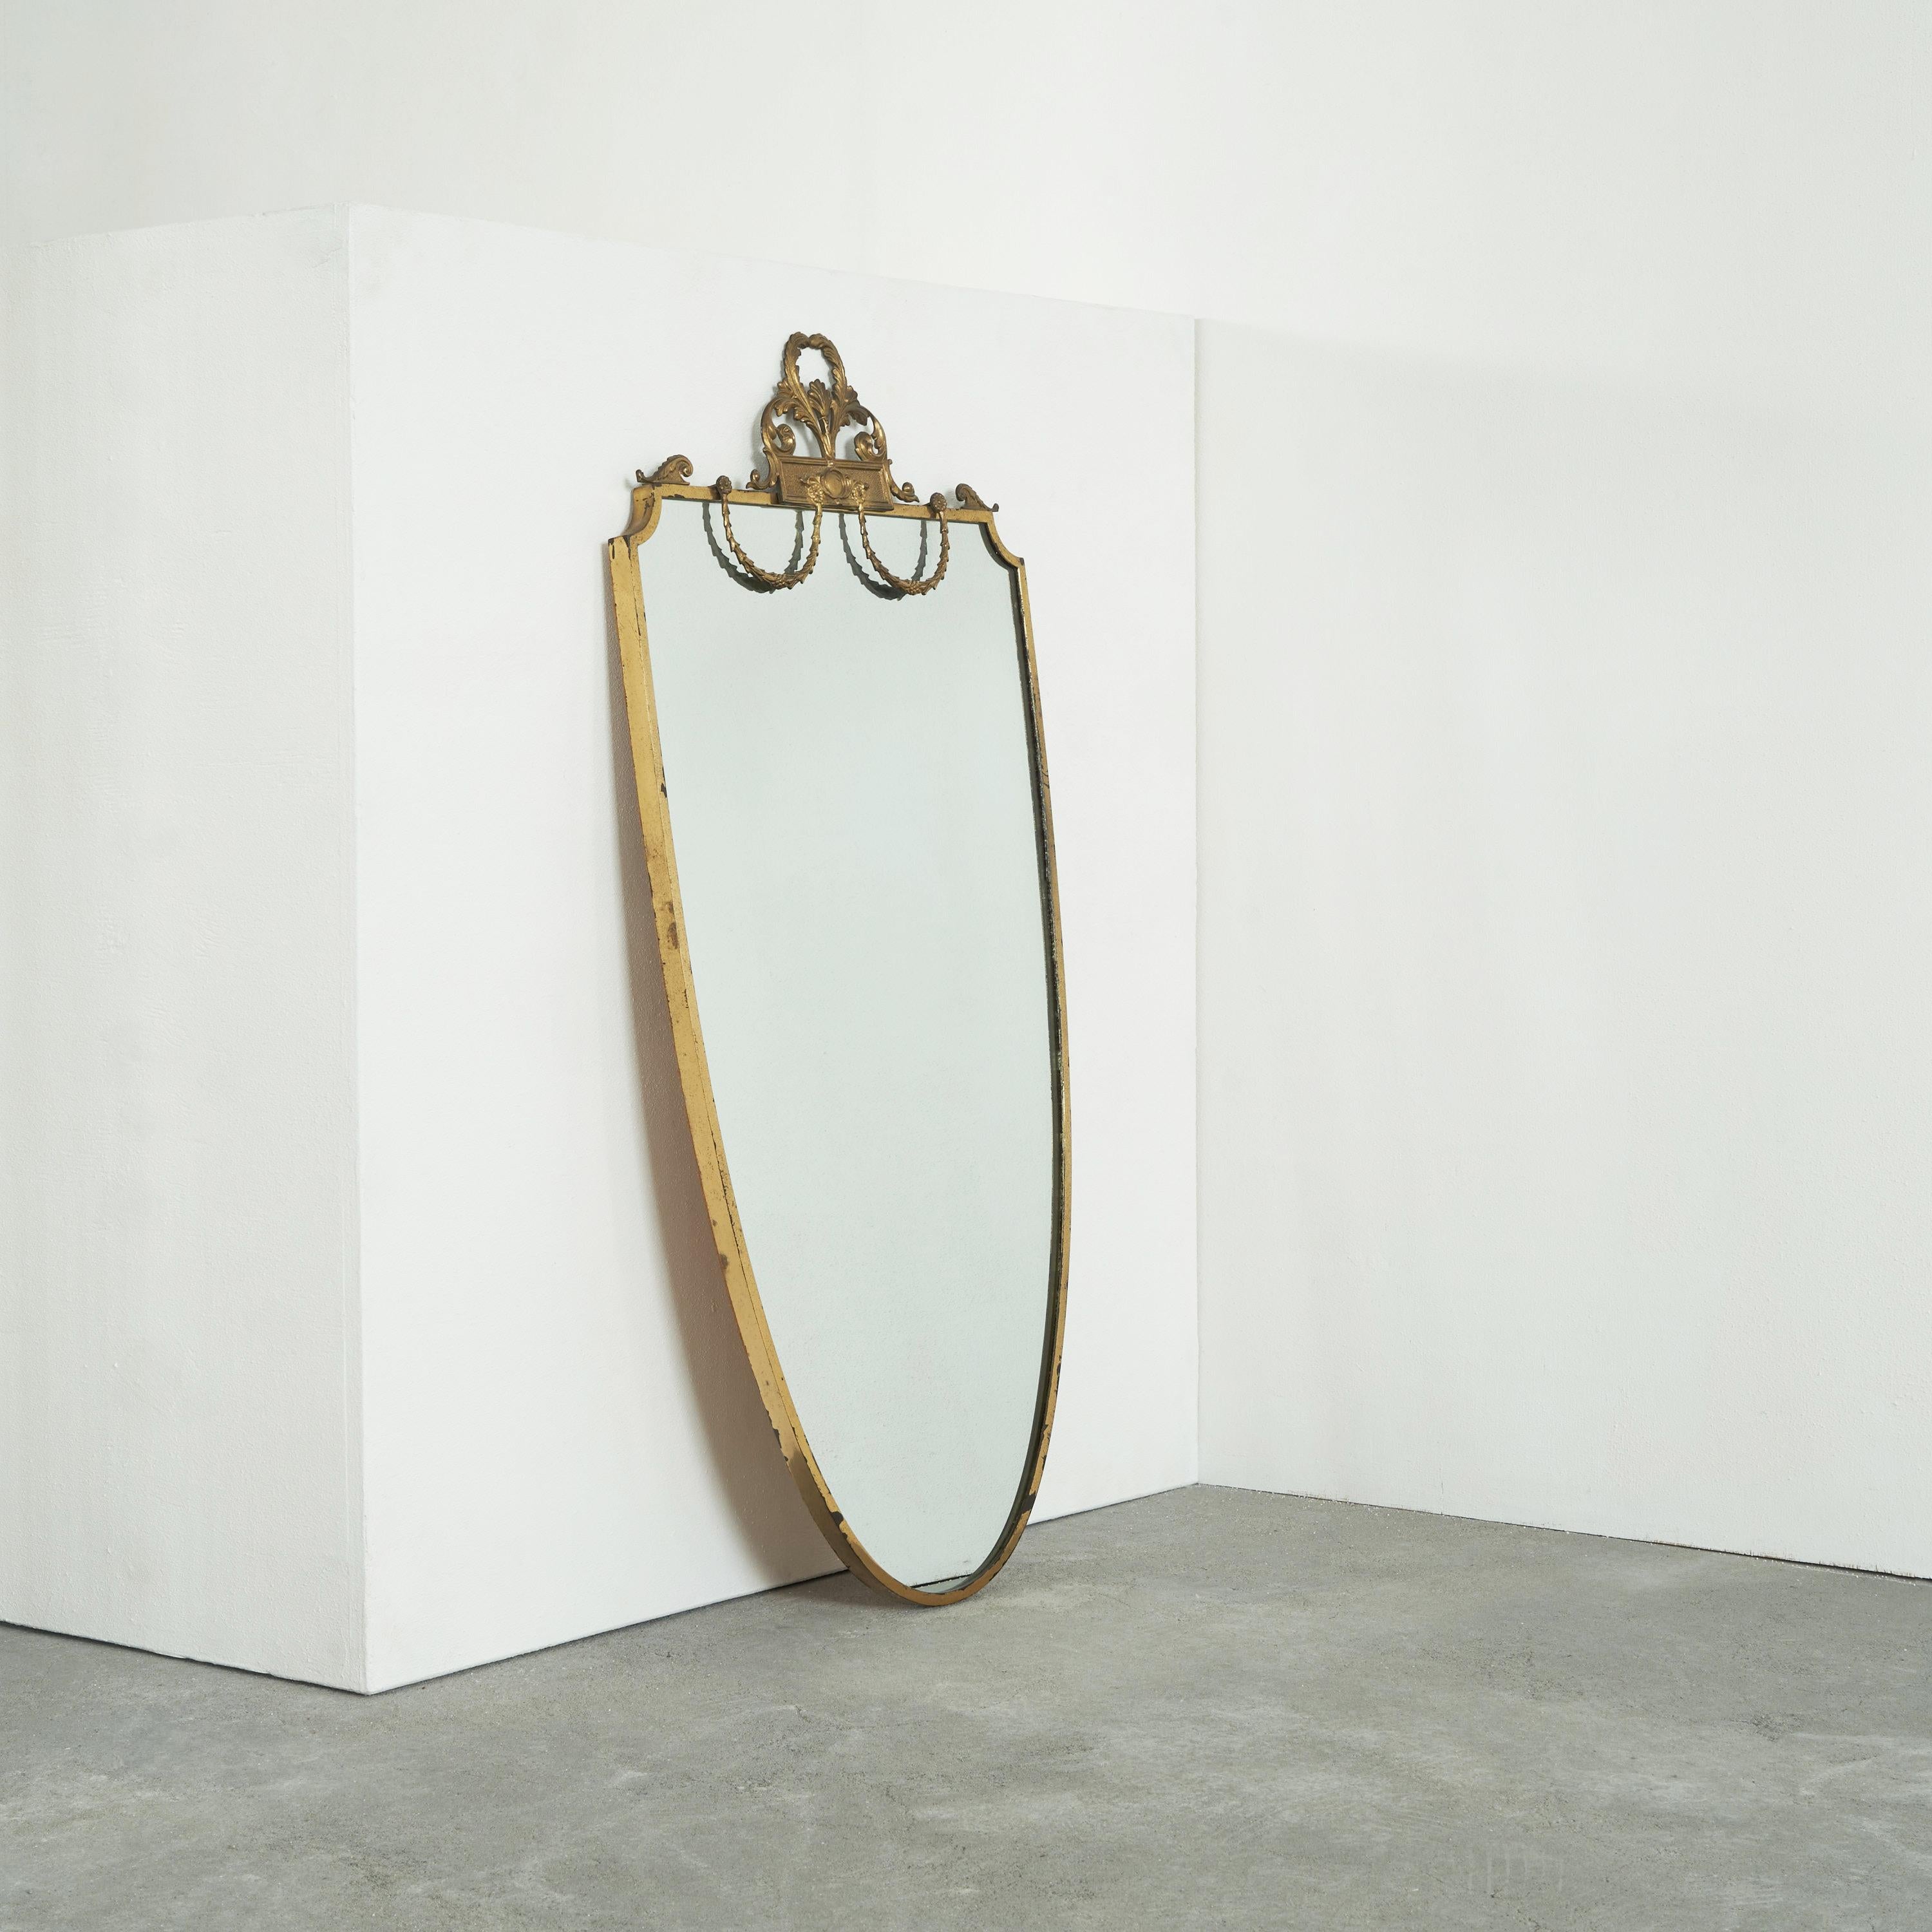 Elegant Mid Century Neoclassical mirror in Patinated Brass. Mid 20th century.

Very stylish and elegant wall mirror in patinated brass in a distinct neoclassical style. It has a very high class appearance due to the overall shape and wonderful